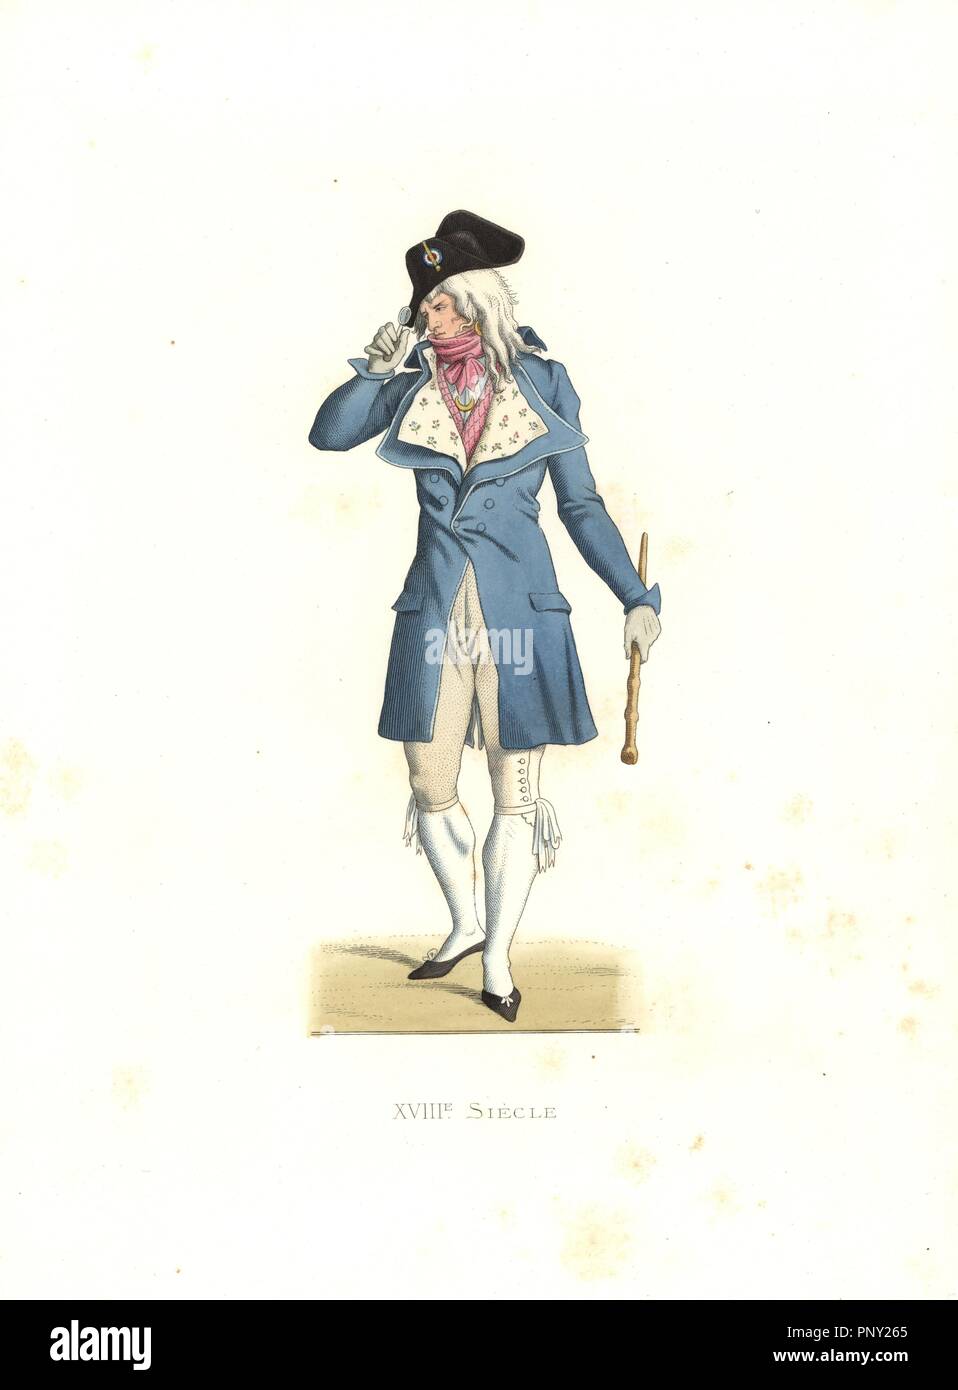 Fashionable man Incroyable, France, 18th century, from a print by Carle Vernet. Handcolored illustration by E. Lechevallier-Chevignard, lithographed by A. Didier, L. Flameng, F. Laguillermie, from Georges Duplessis's 'Costumes historiques des XVIe, XVIIe et XVIIIe siecles' (Historical costumes of the 16th, 17th and 18th centuries), Paris 1867. The book was a continuation of the series on the costumes of the 12th to 15th centuries published by Camille Bonnard and Paul Mercuri from 1830. Georges Duplessis (1834-1899) was curator of the Prints department at the Bibliotheque nationale. Edmond Lech Stock Photo